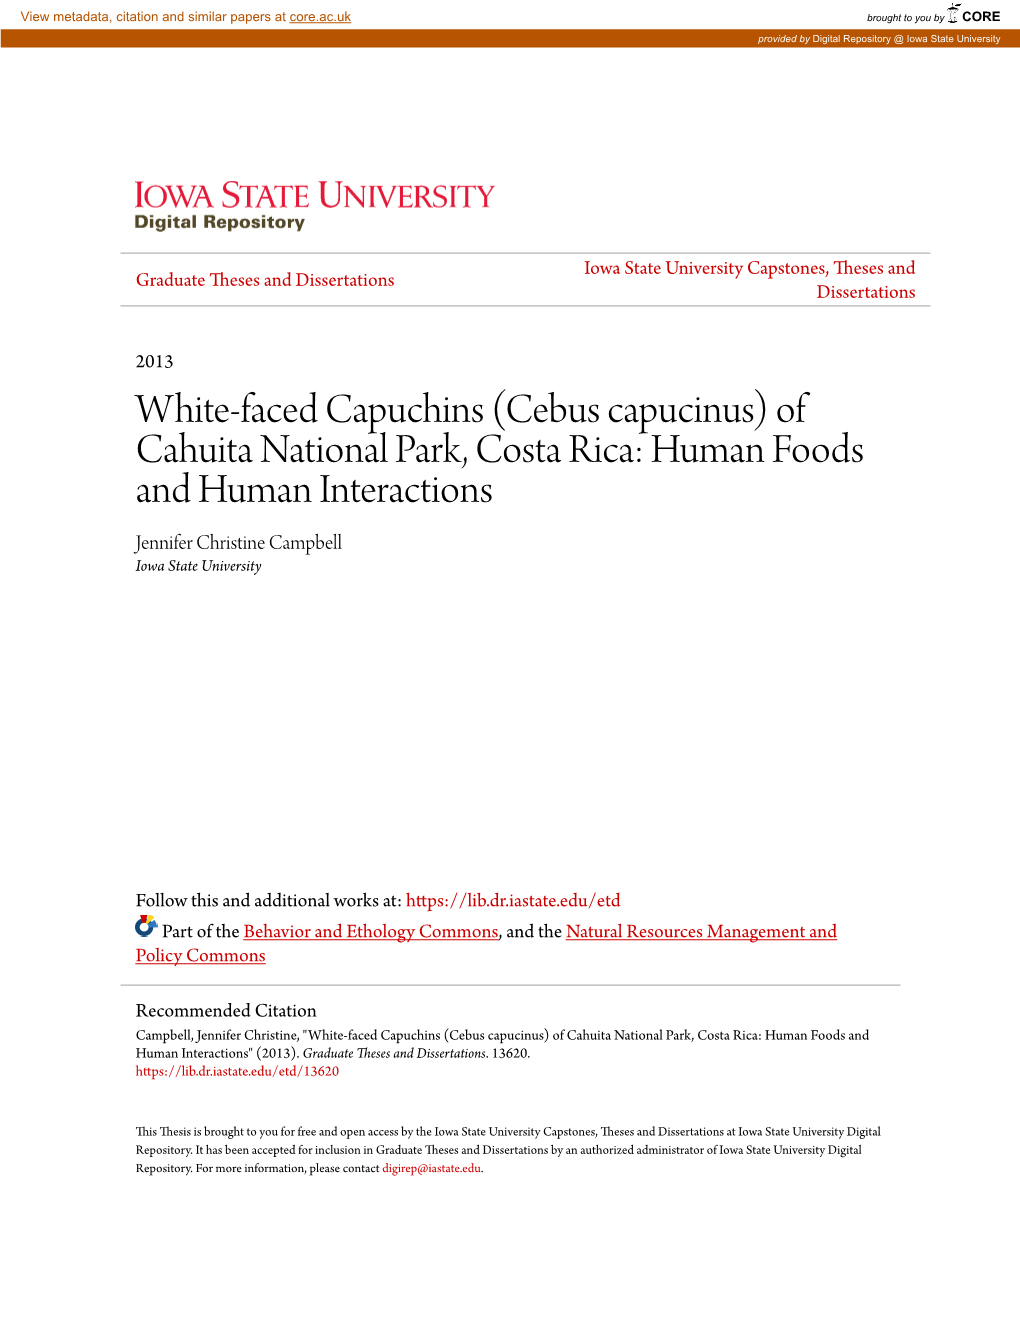 White-Faced Capuchins (Cebus Capucinus) of Cahuita National Park, Costa Rica: Human Foods and Human Interactions Jennifer Christine Campbell Iowa State University